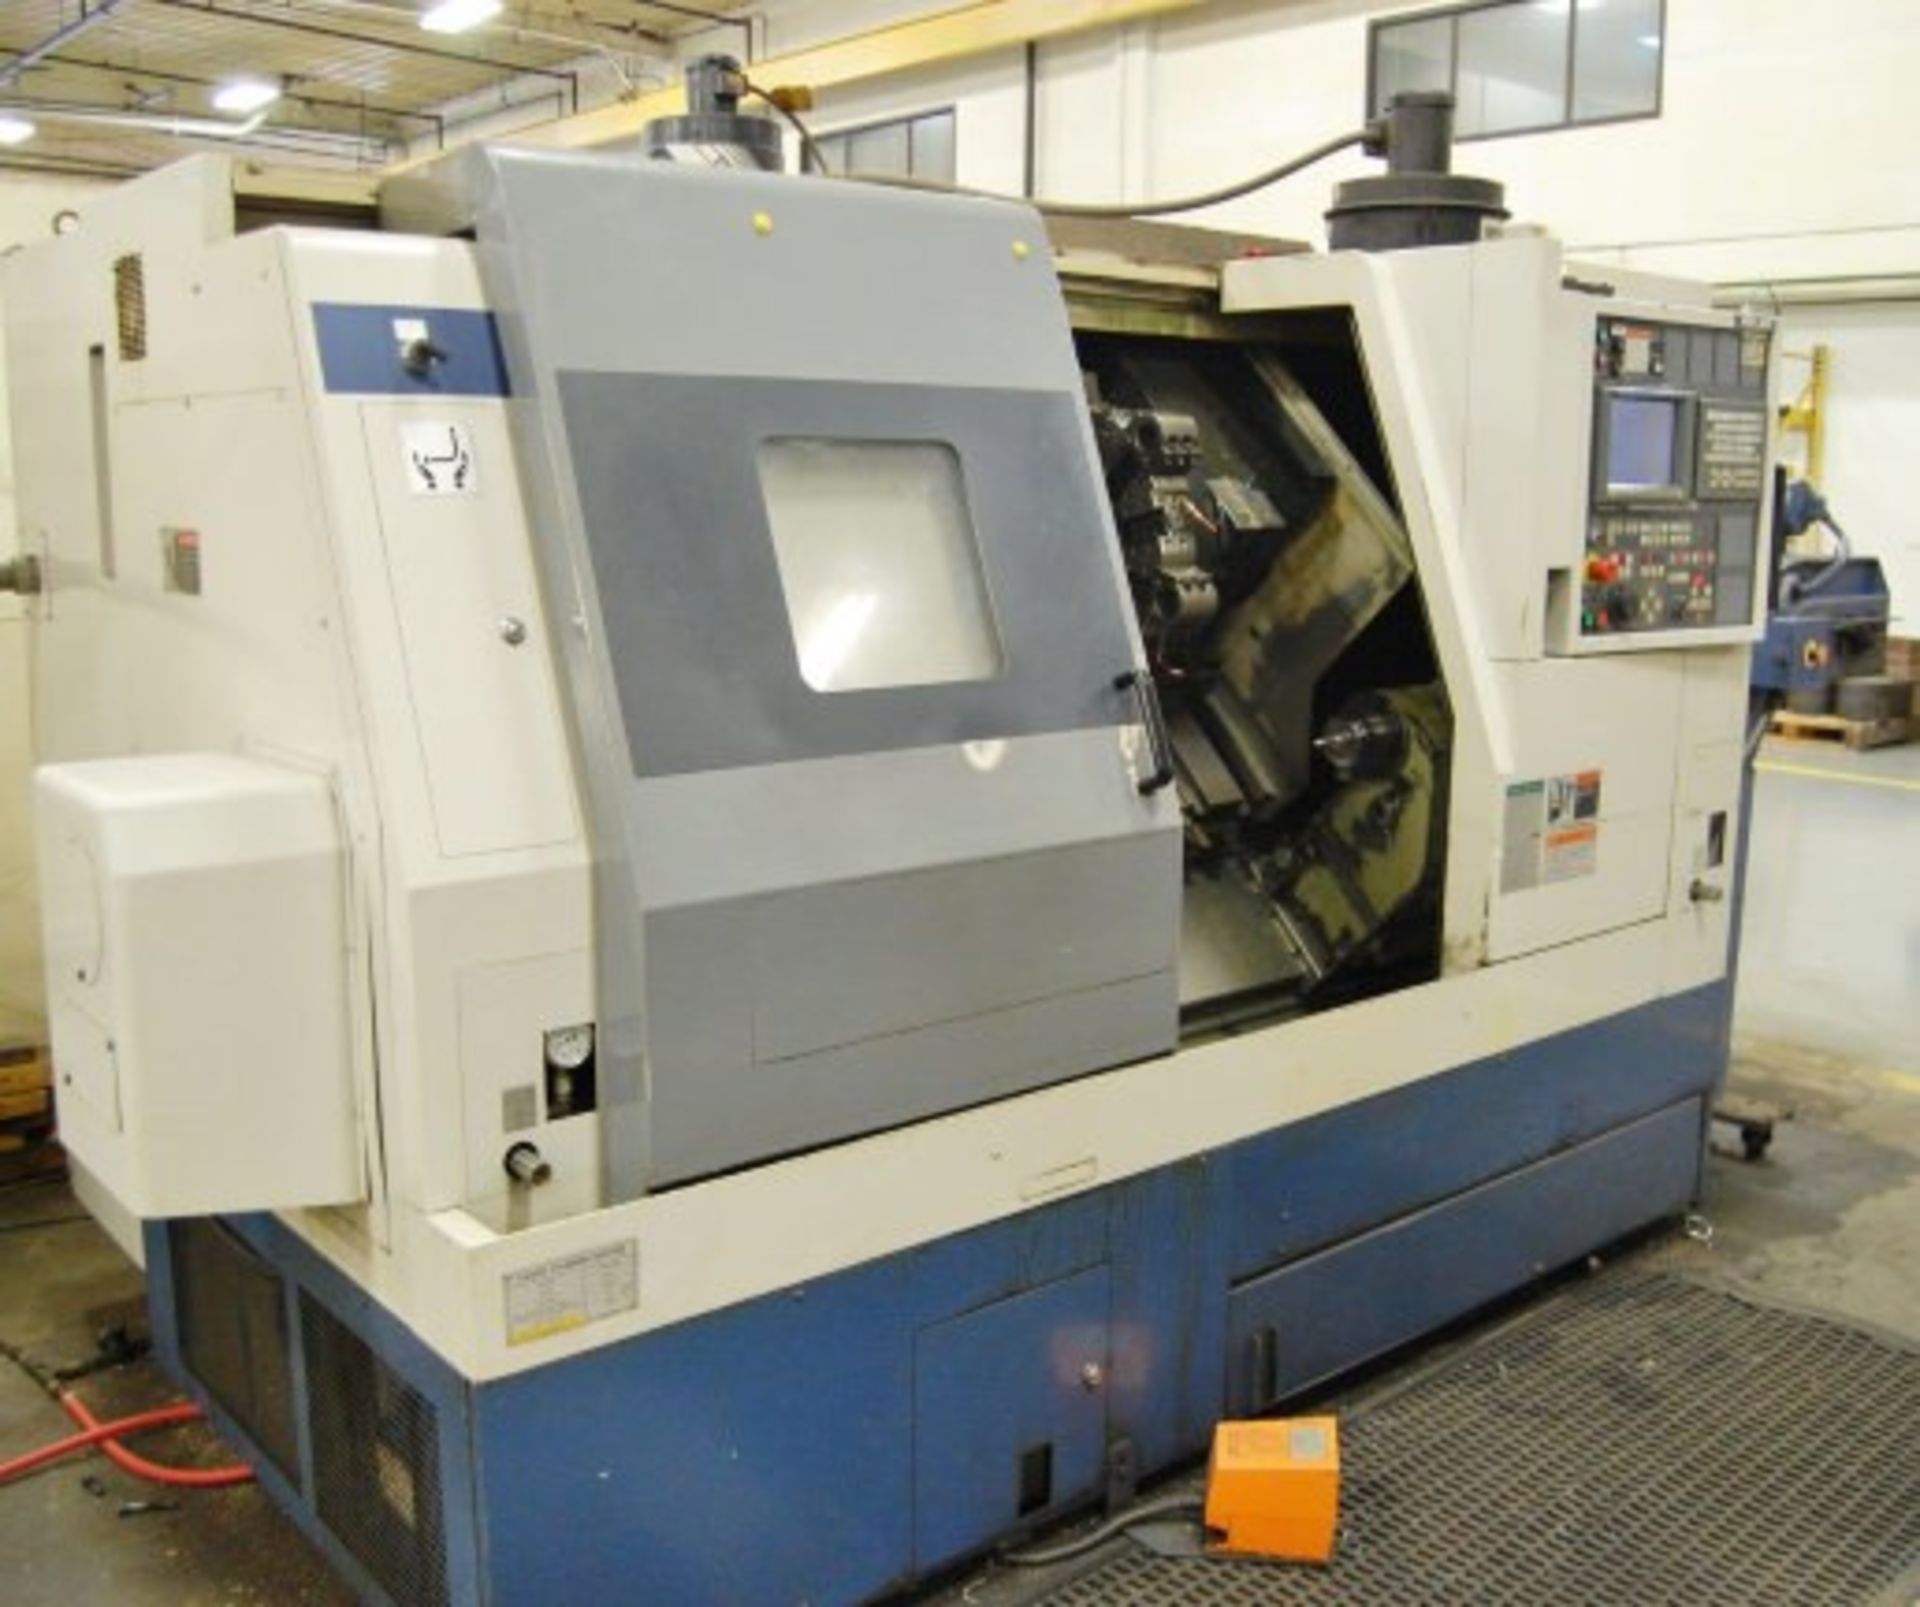 MORI SEIKI SL300A CNC Slant Bed Turning Center, 28.1" Swing Over Bed, 19.7"   Swing Over Cross